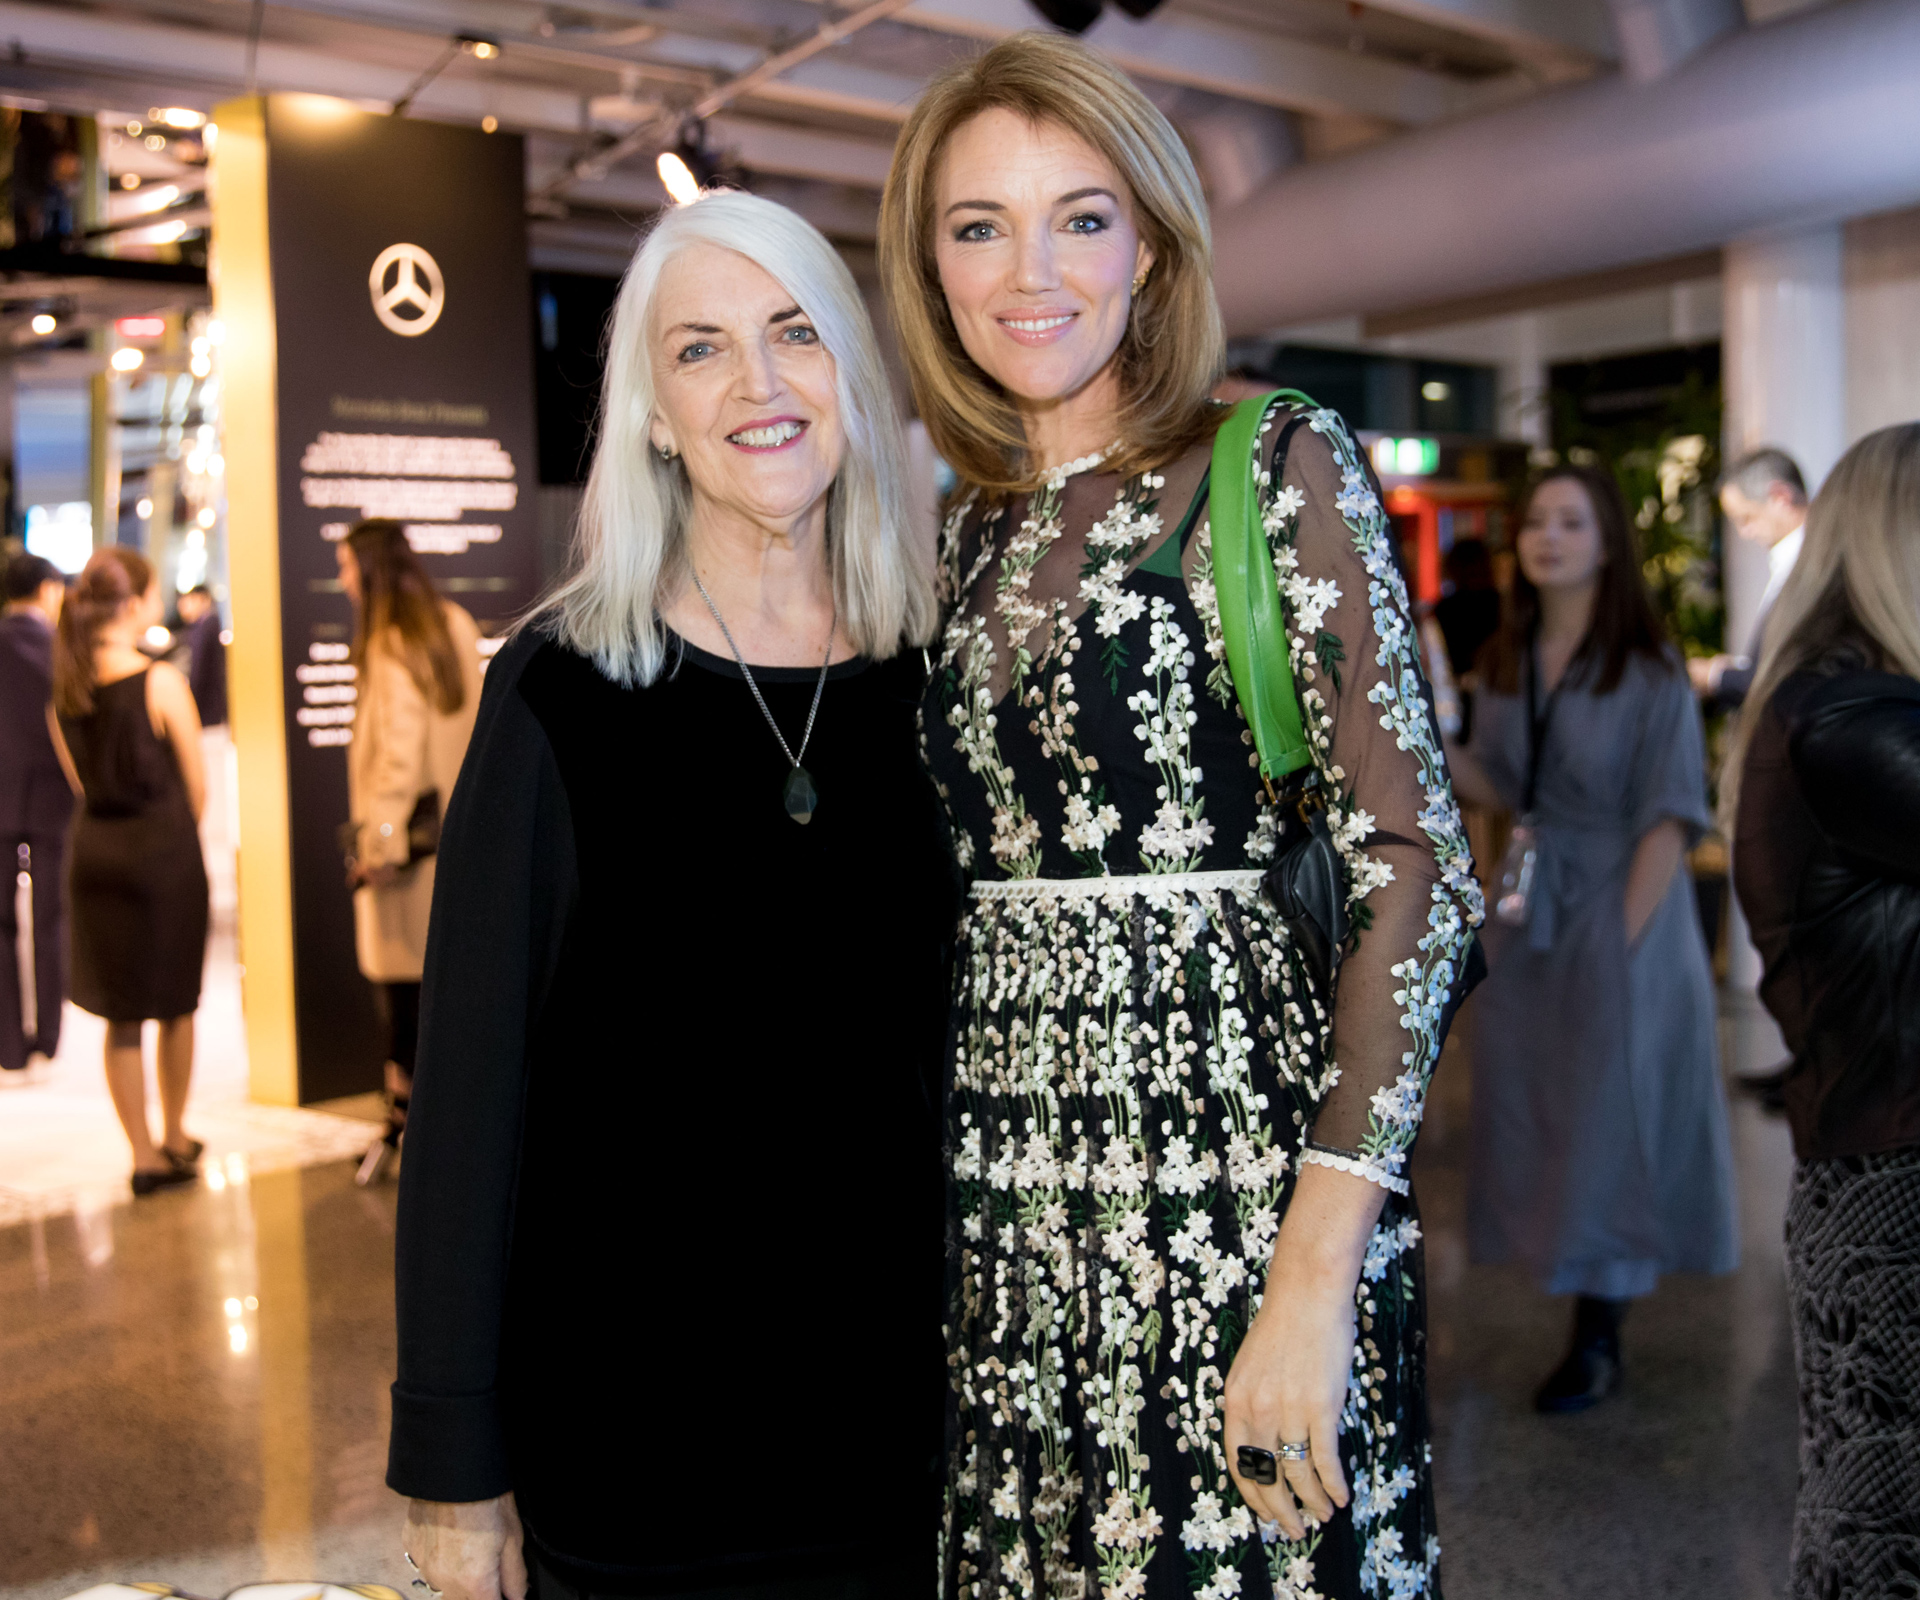 Petra Bagust at New Zealand Fashion Week Opening Night 2017